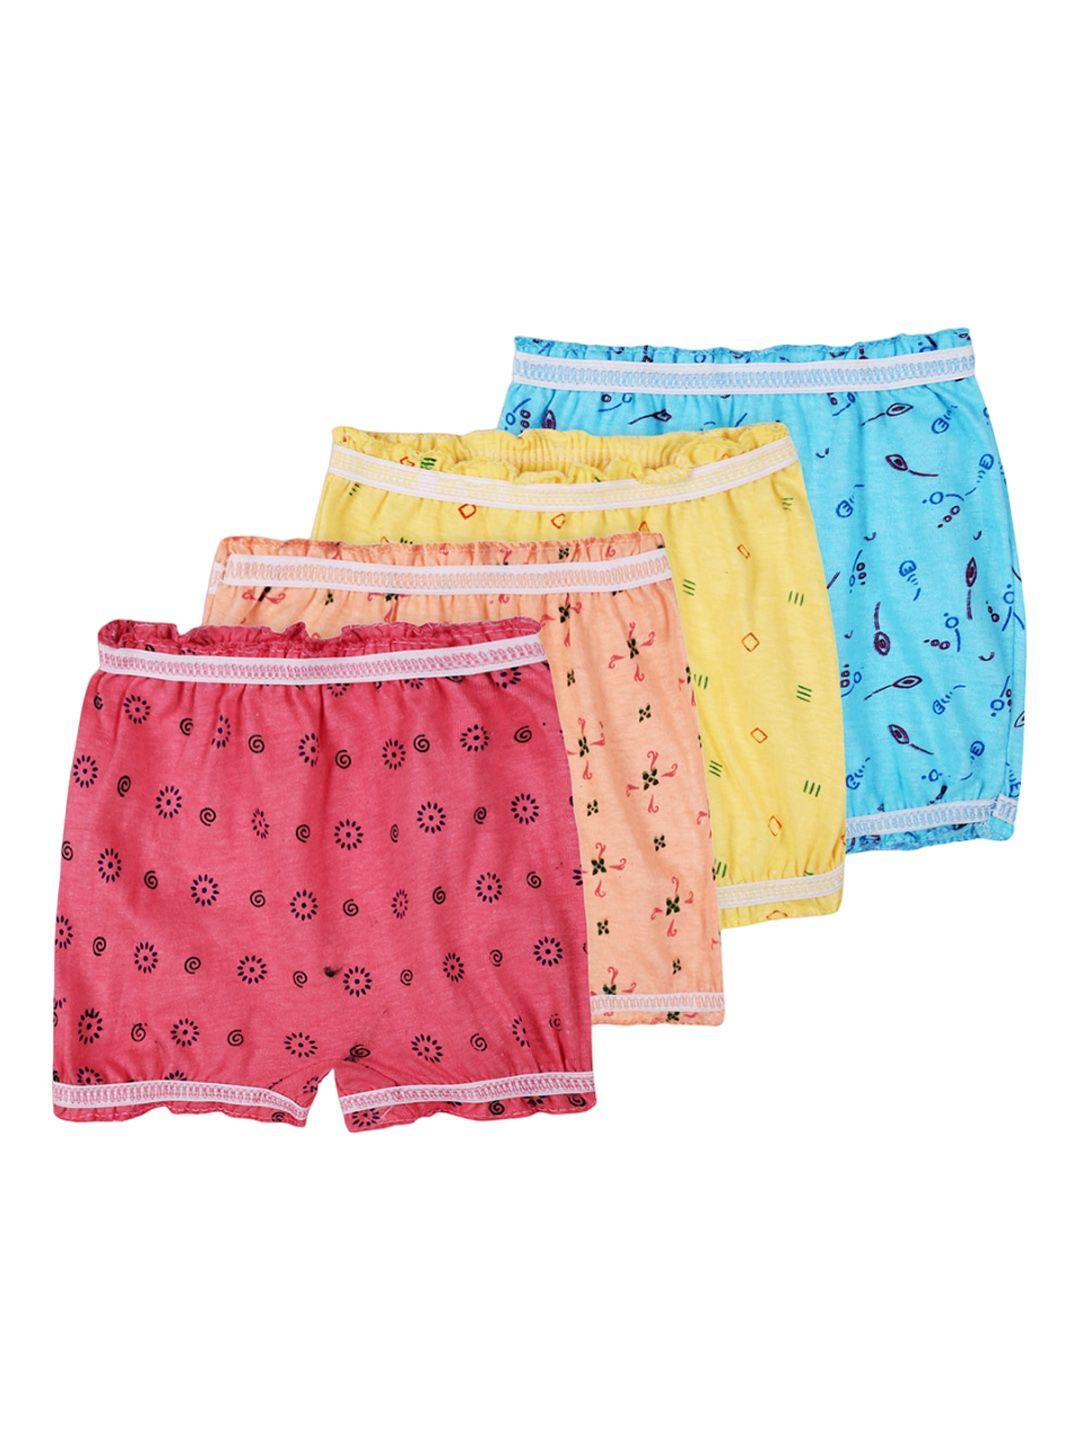 baesd-kids-pack-of-4-printed-pure-cotton-boyshorts-briefs